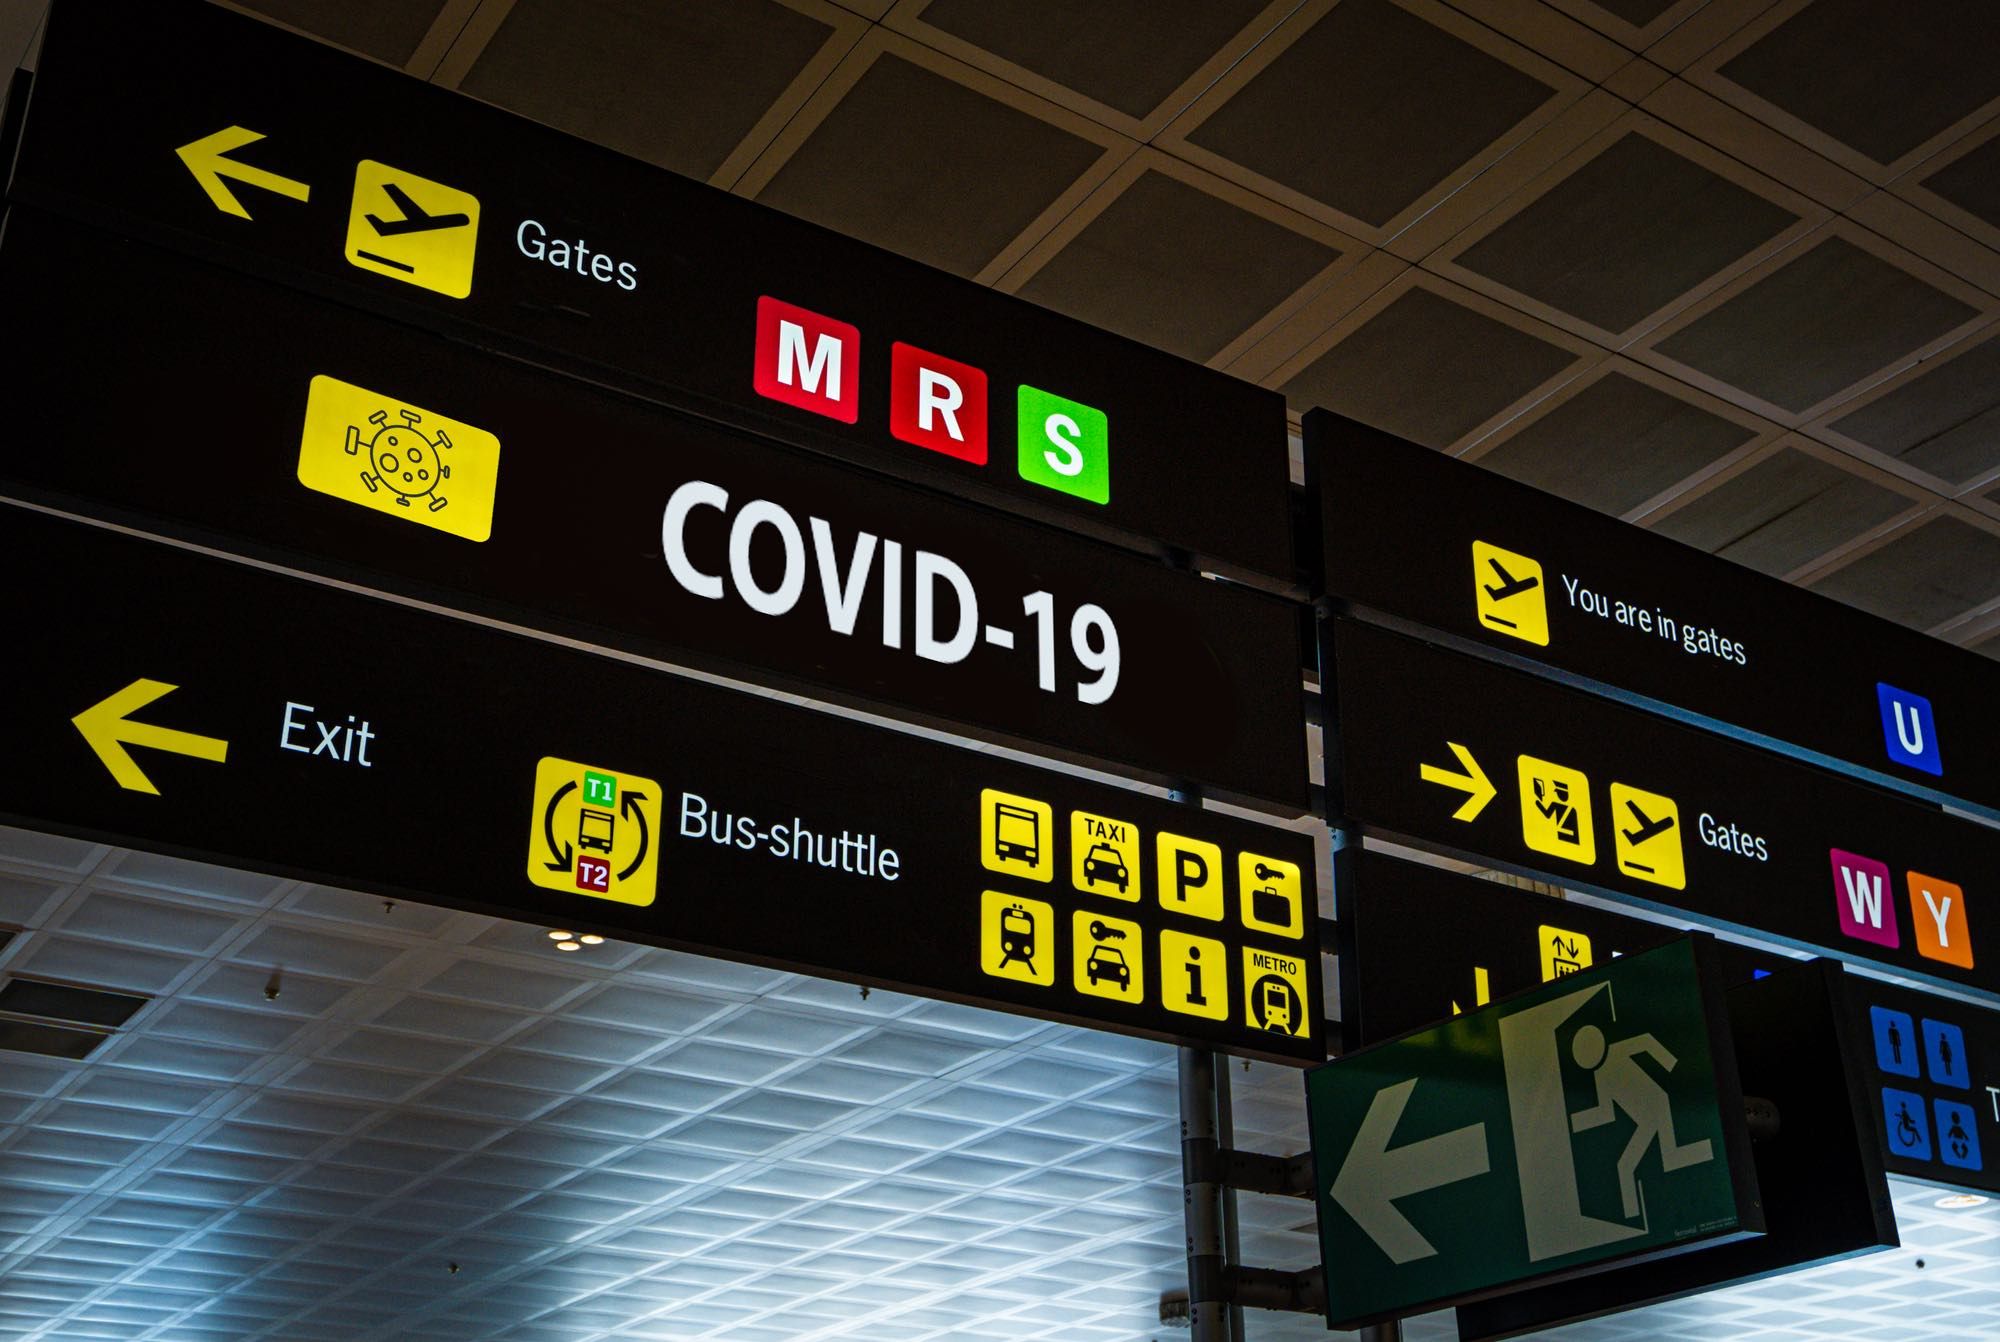 Spirit airlines covid-19 sign